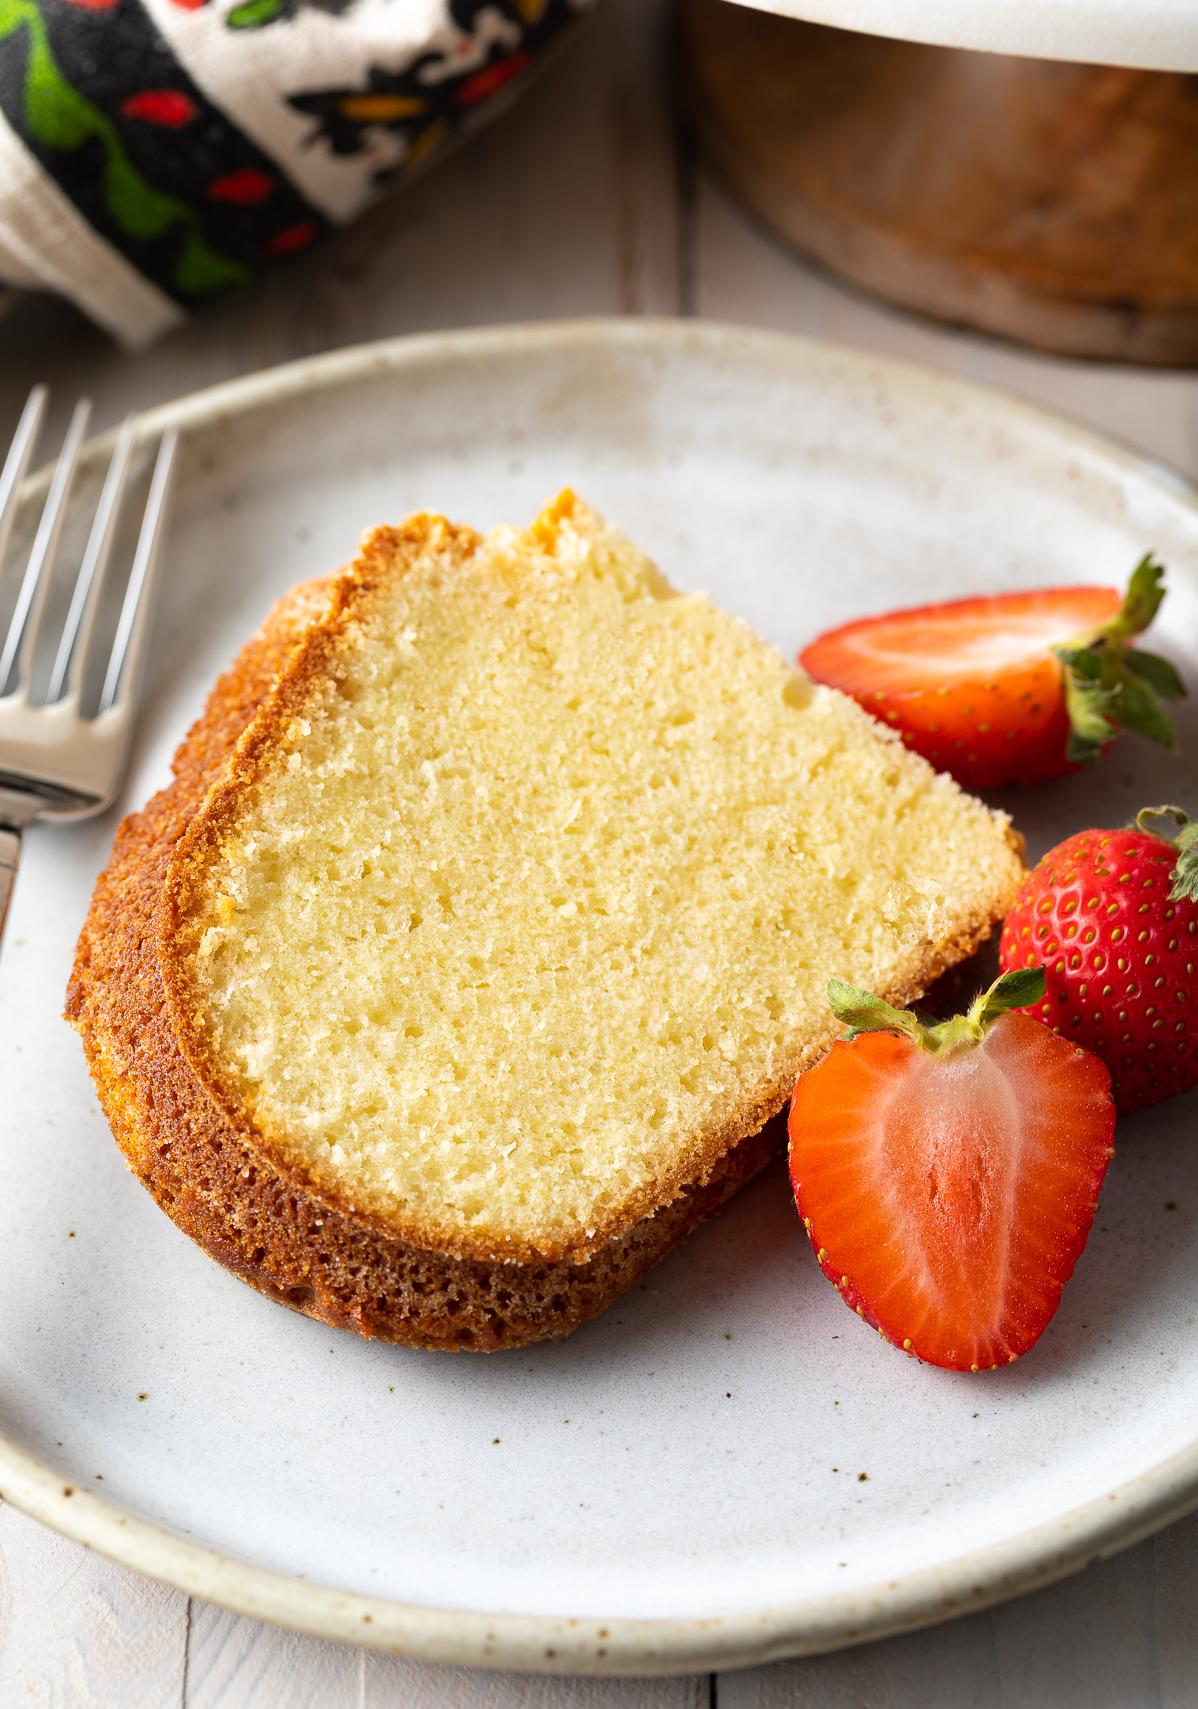  Say cheese! This Cream Cheese Pound Cake is picture-perfect.